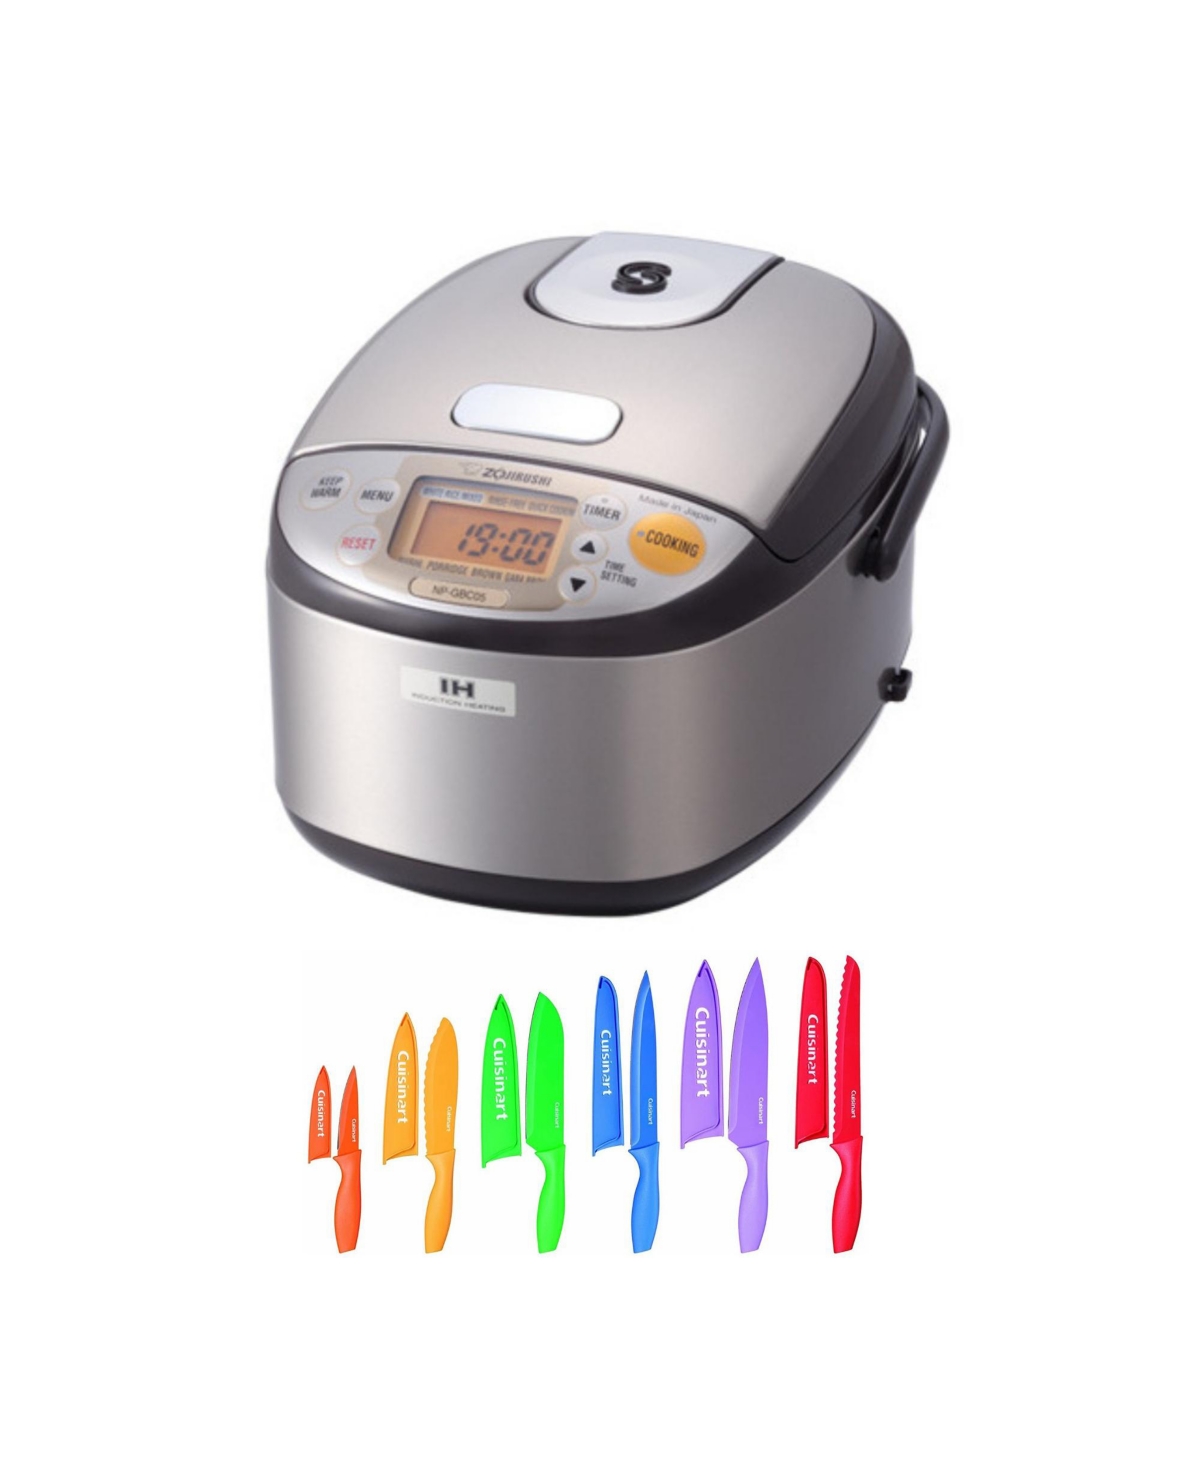 Induction Heating, Rice Cooker, And Warmer, 3-Cup With 12-Knife Set - Gold